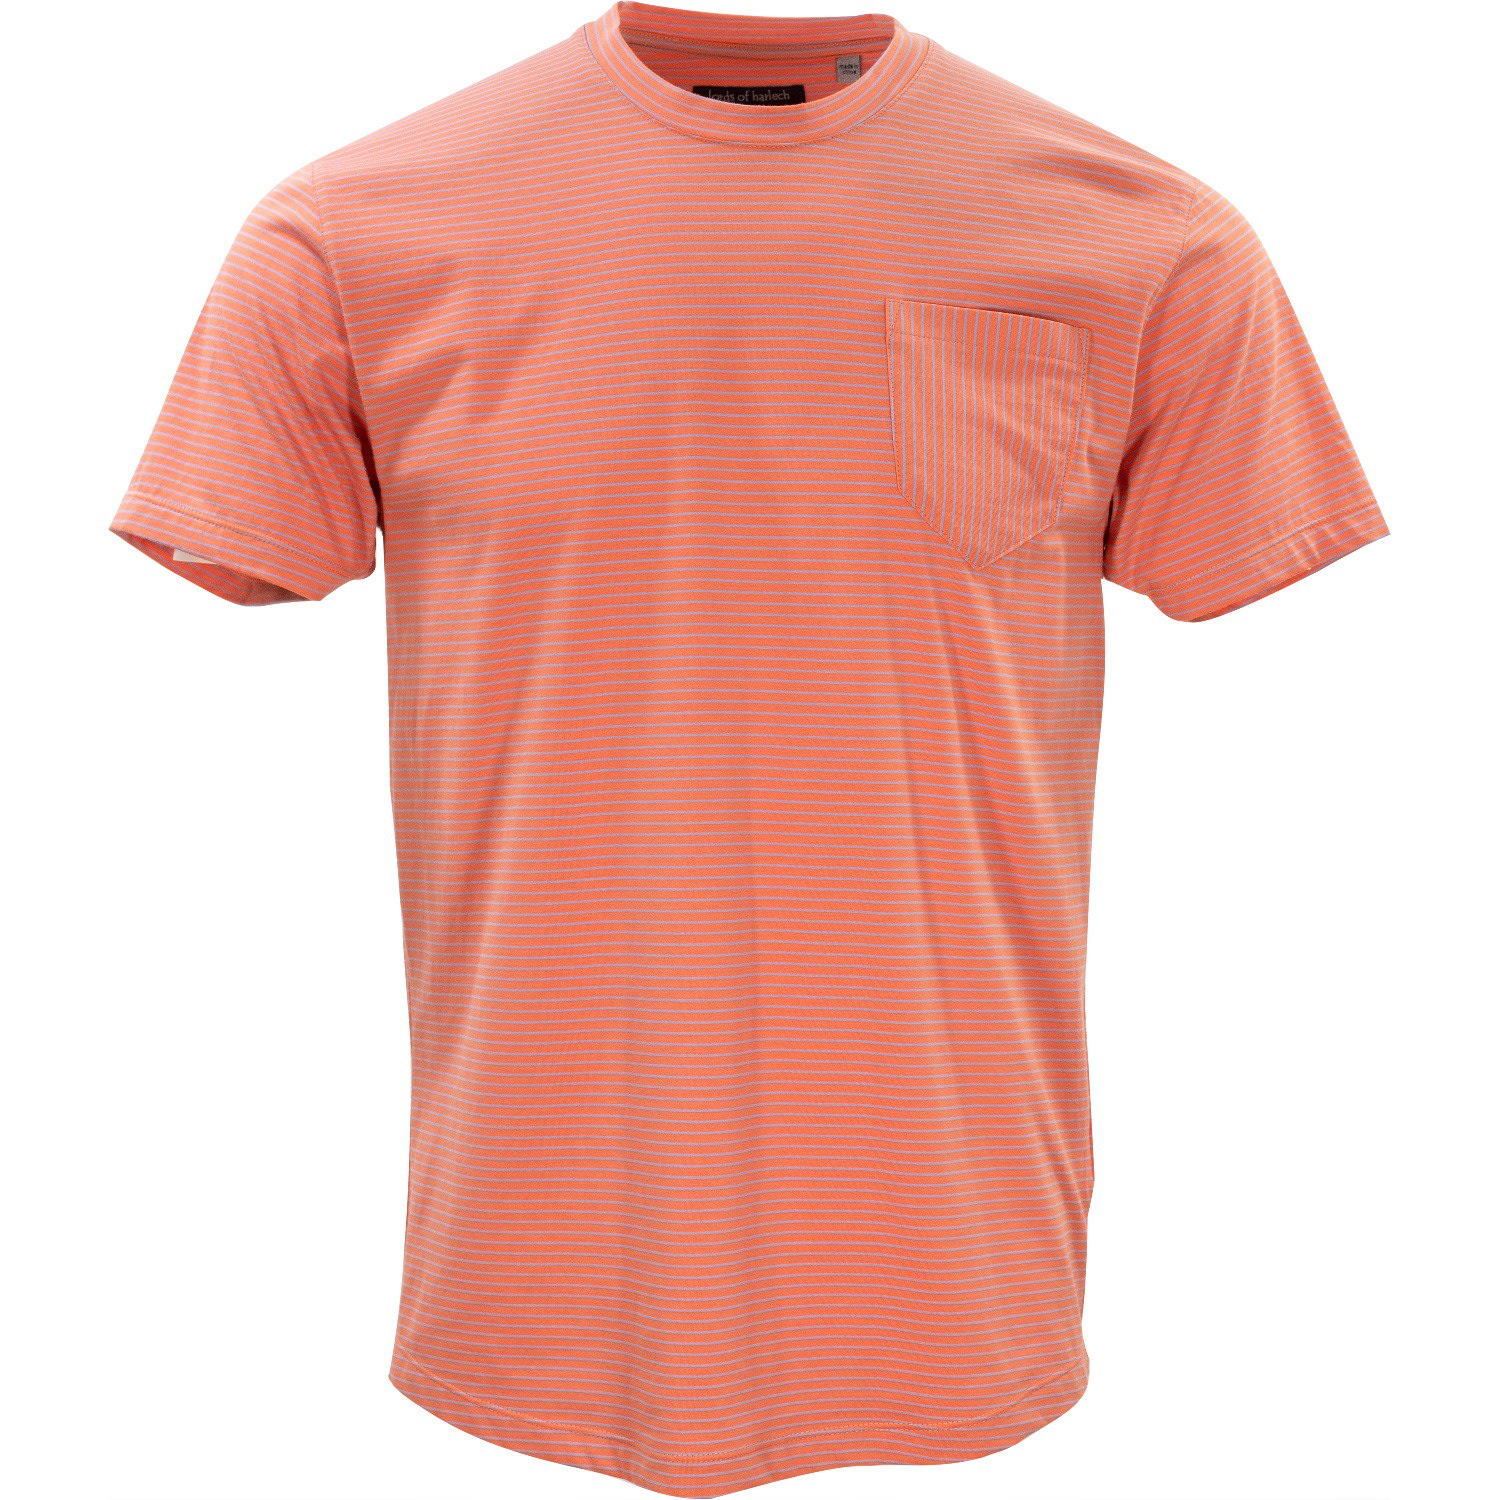 Men’s Yellow / Orange Tate Crew - Coral & Blue Stripe Extra Small Lords of Harlech